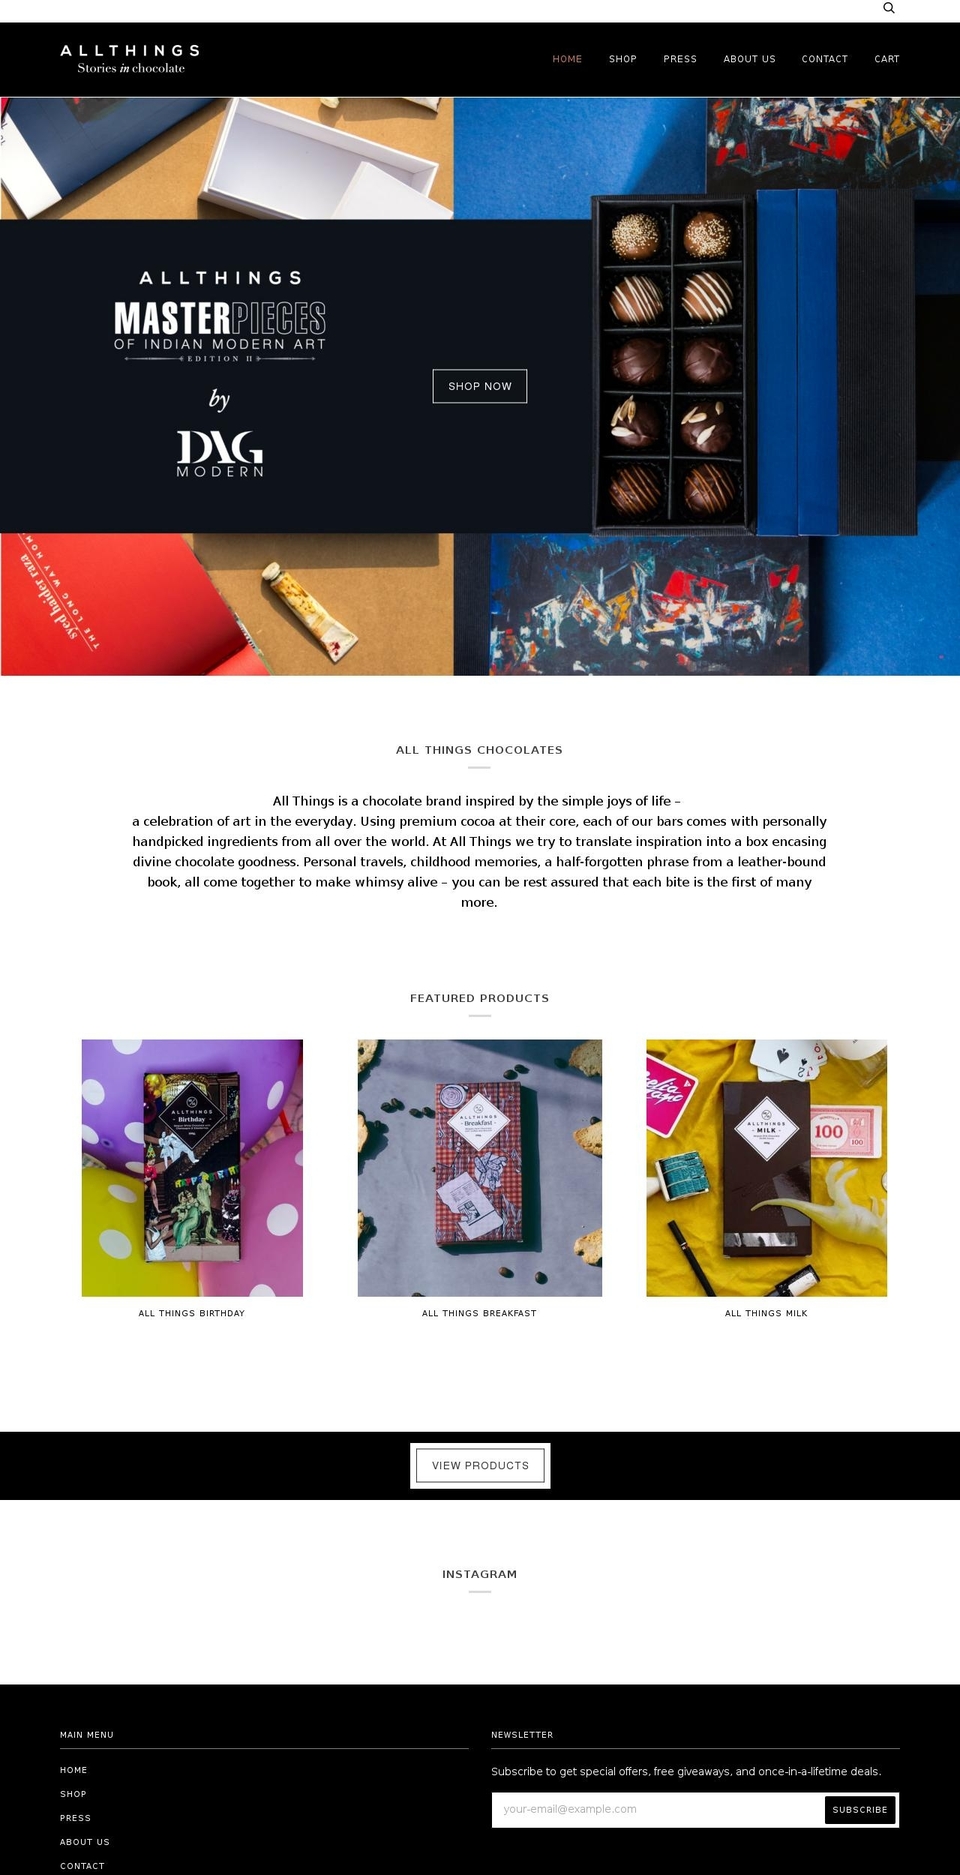 Paper Shopify theme site example theallthingsshop.com